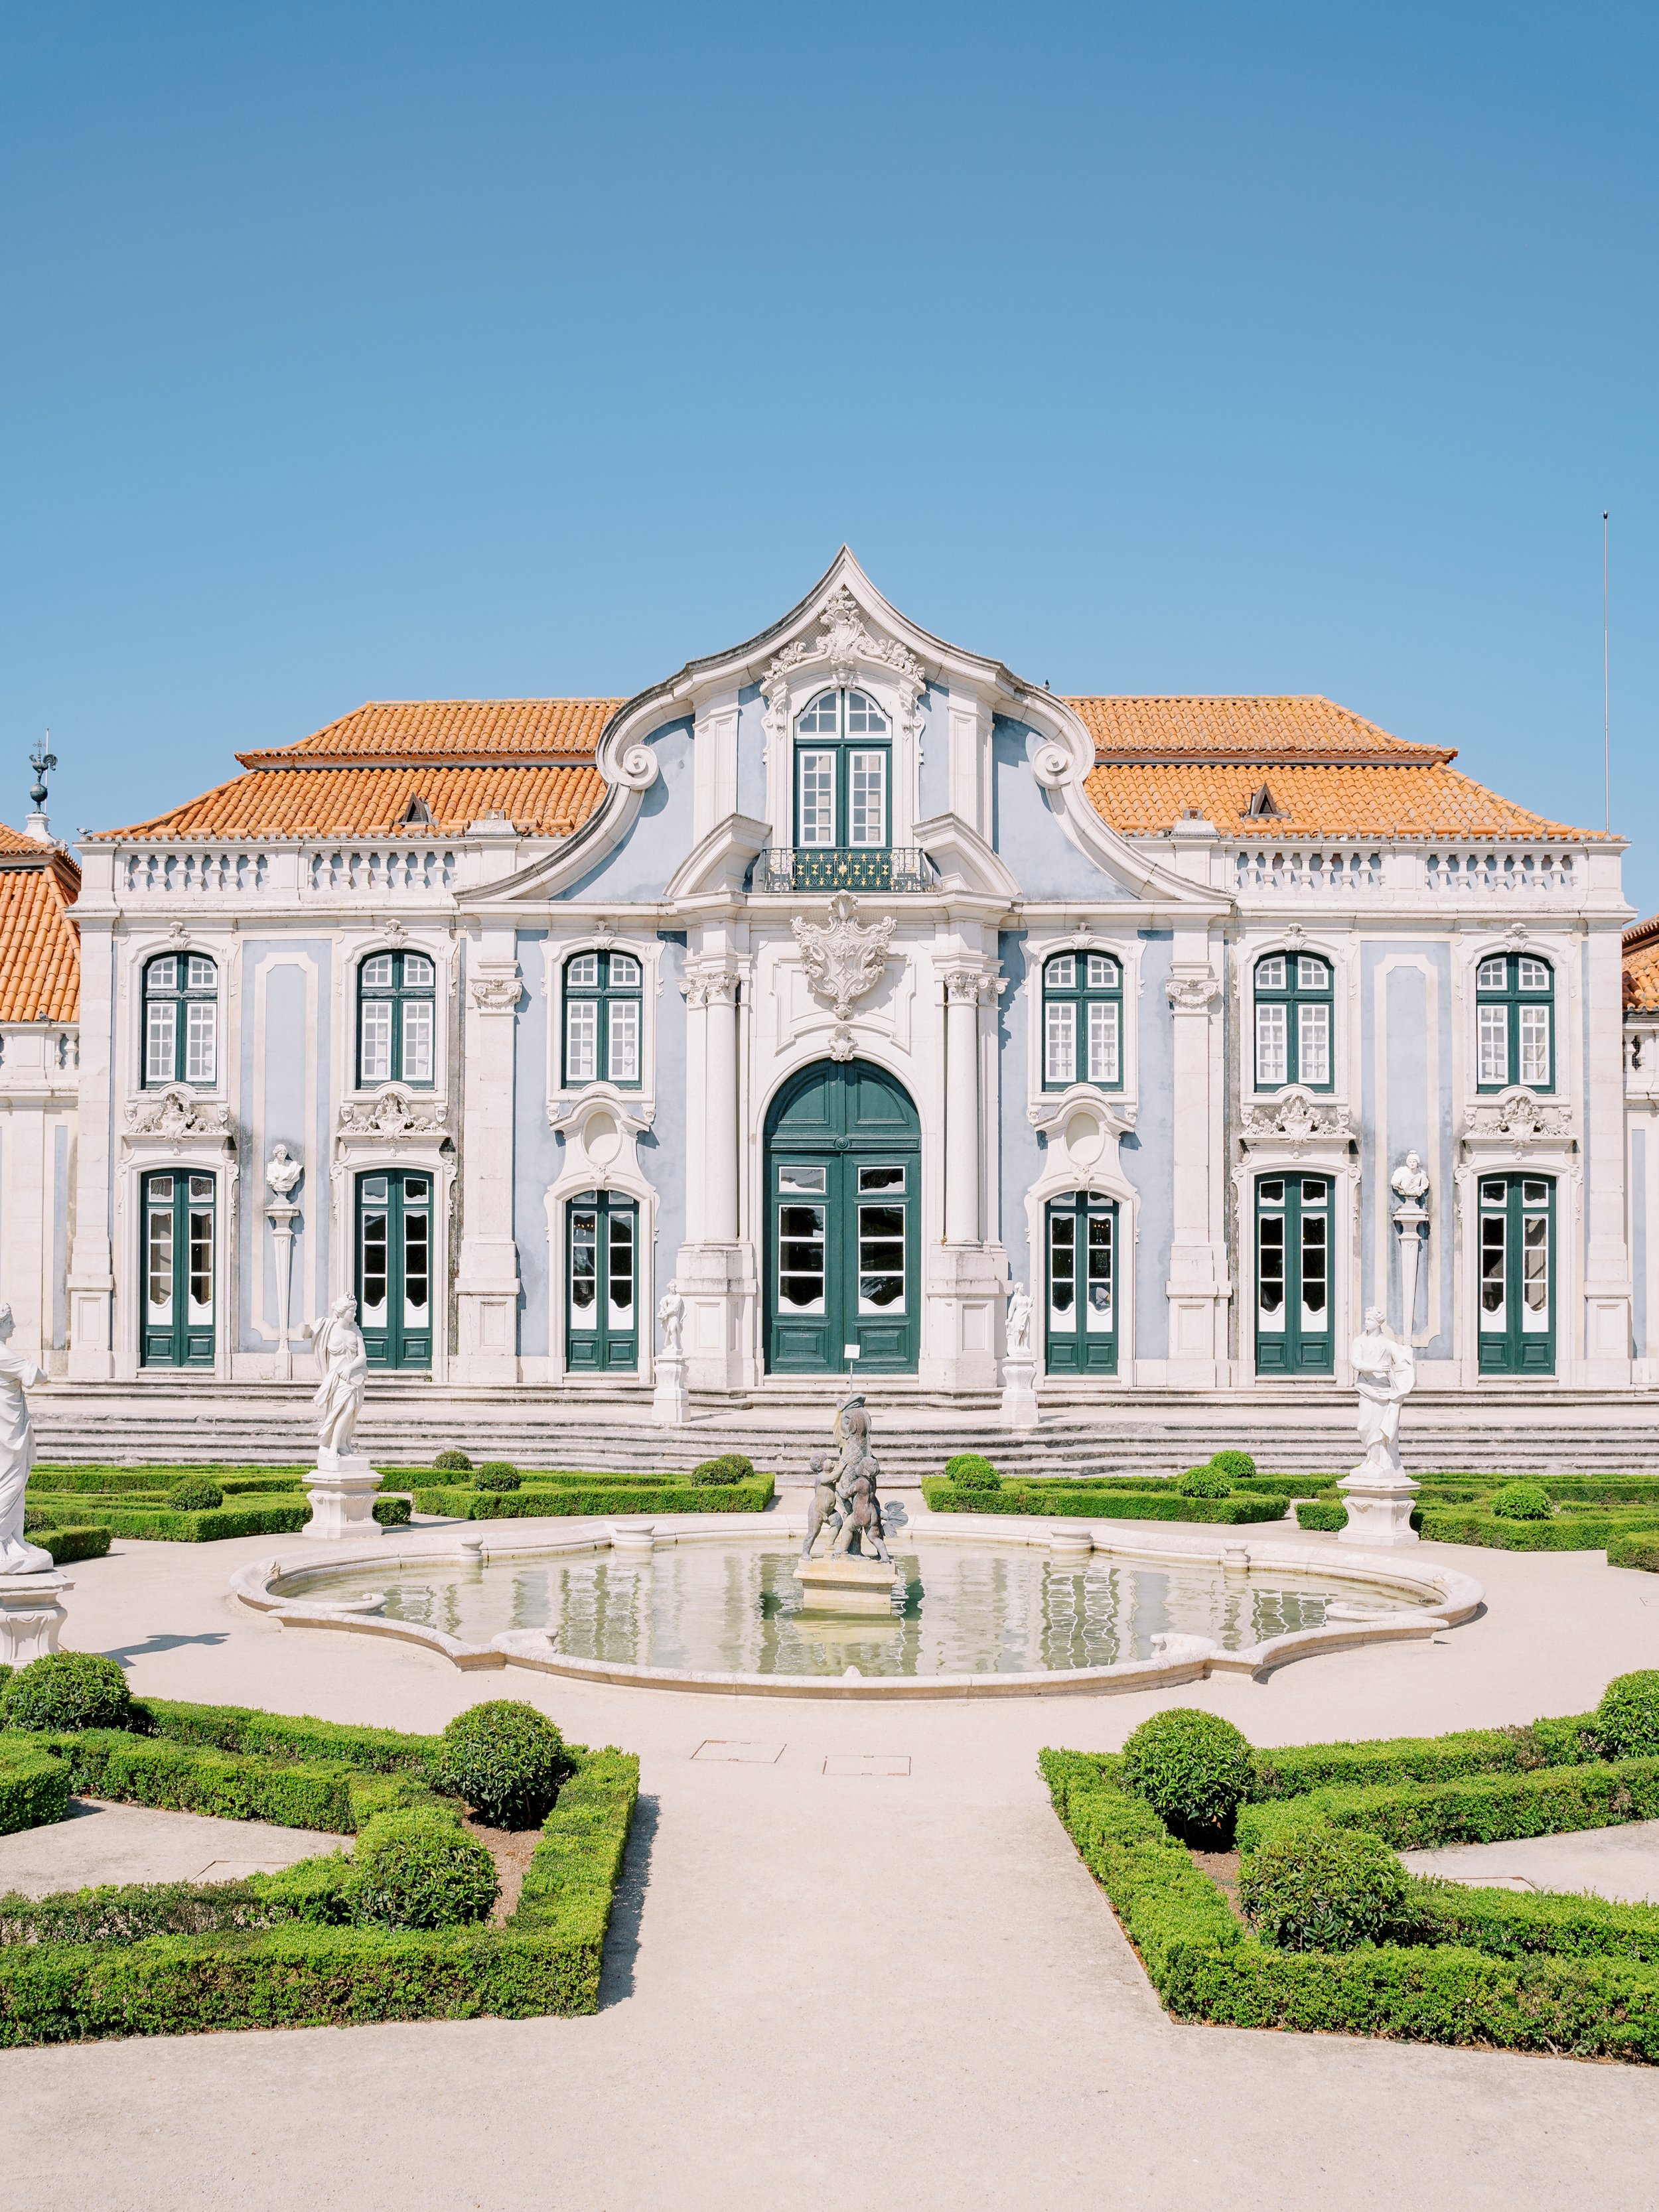 An impressive photo of the back of Palácio de Queluz with a fountain in the middle, resembling to french palaces